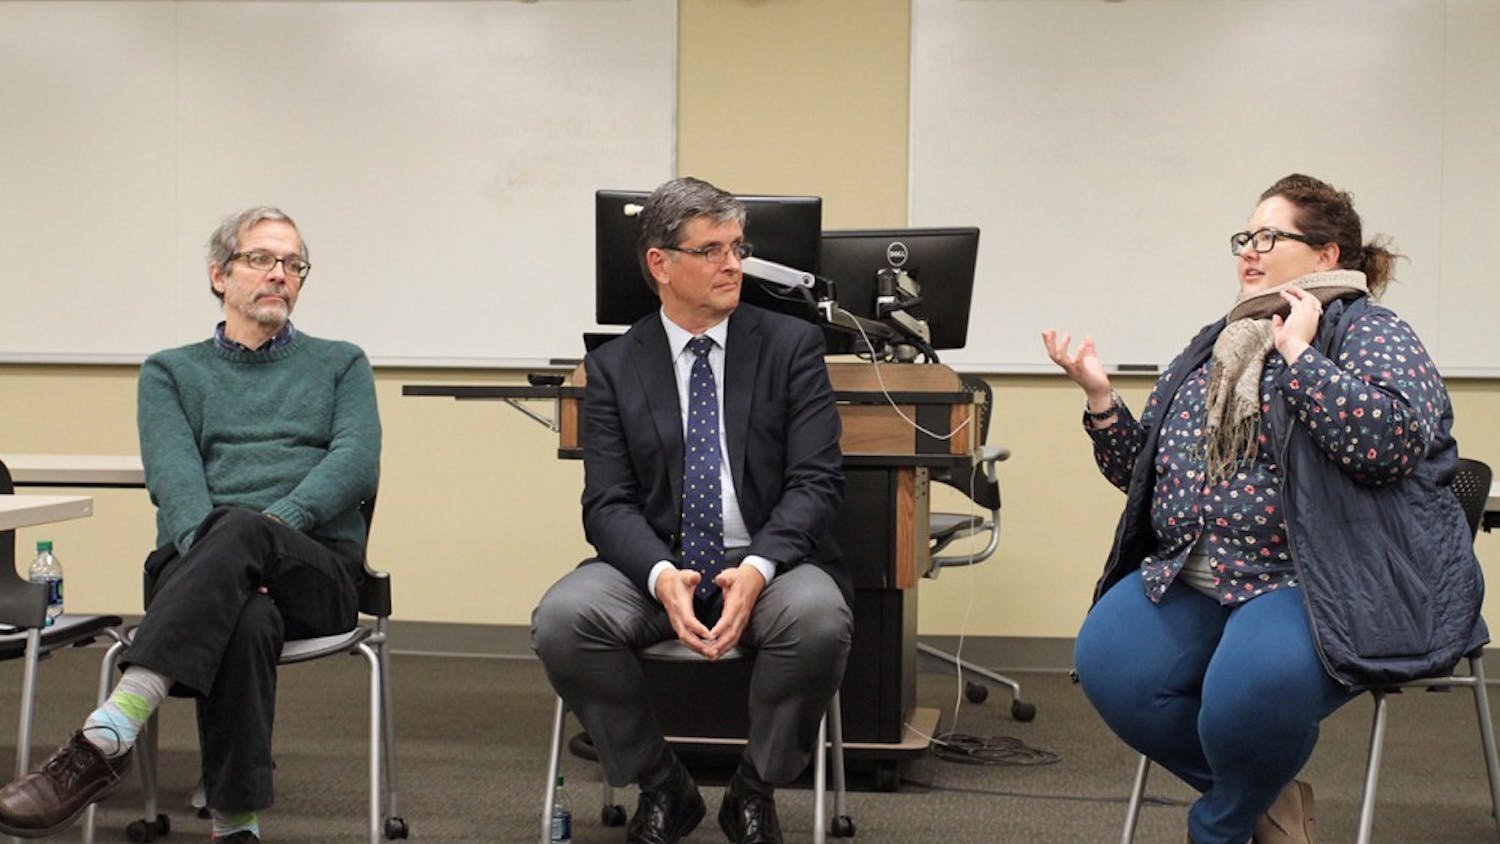 (From left to right) Prof. Michael Wilkerson, Michael Rushton and Ursula Kuhar talk about the U.S. visa and foreign artists' immigration services Tuesday.